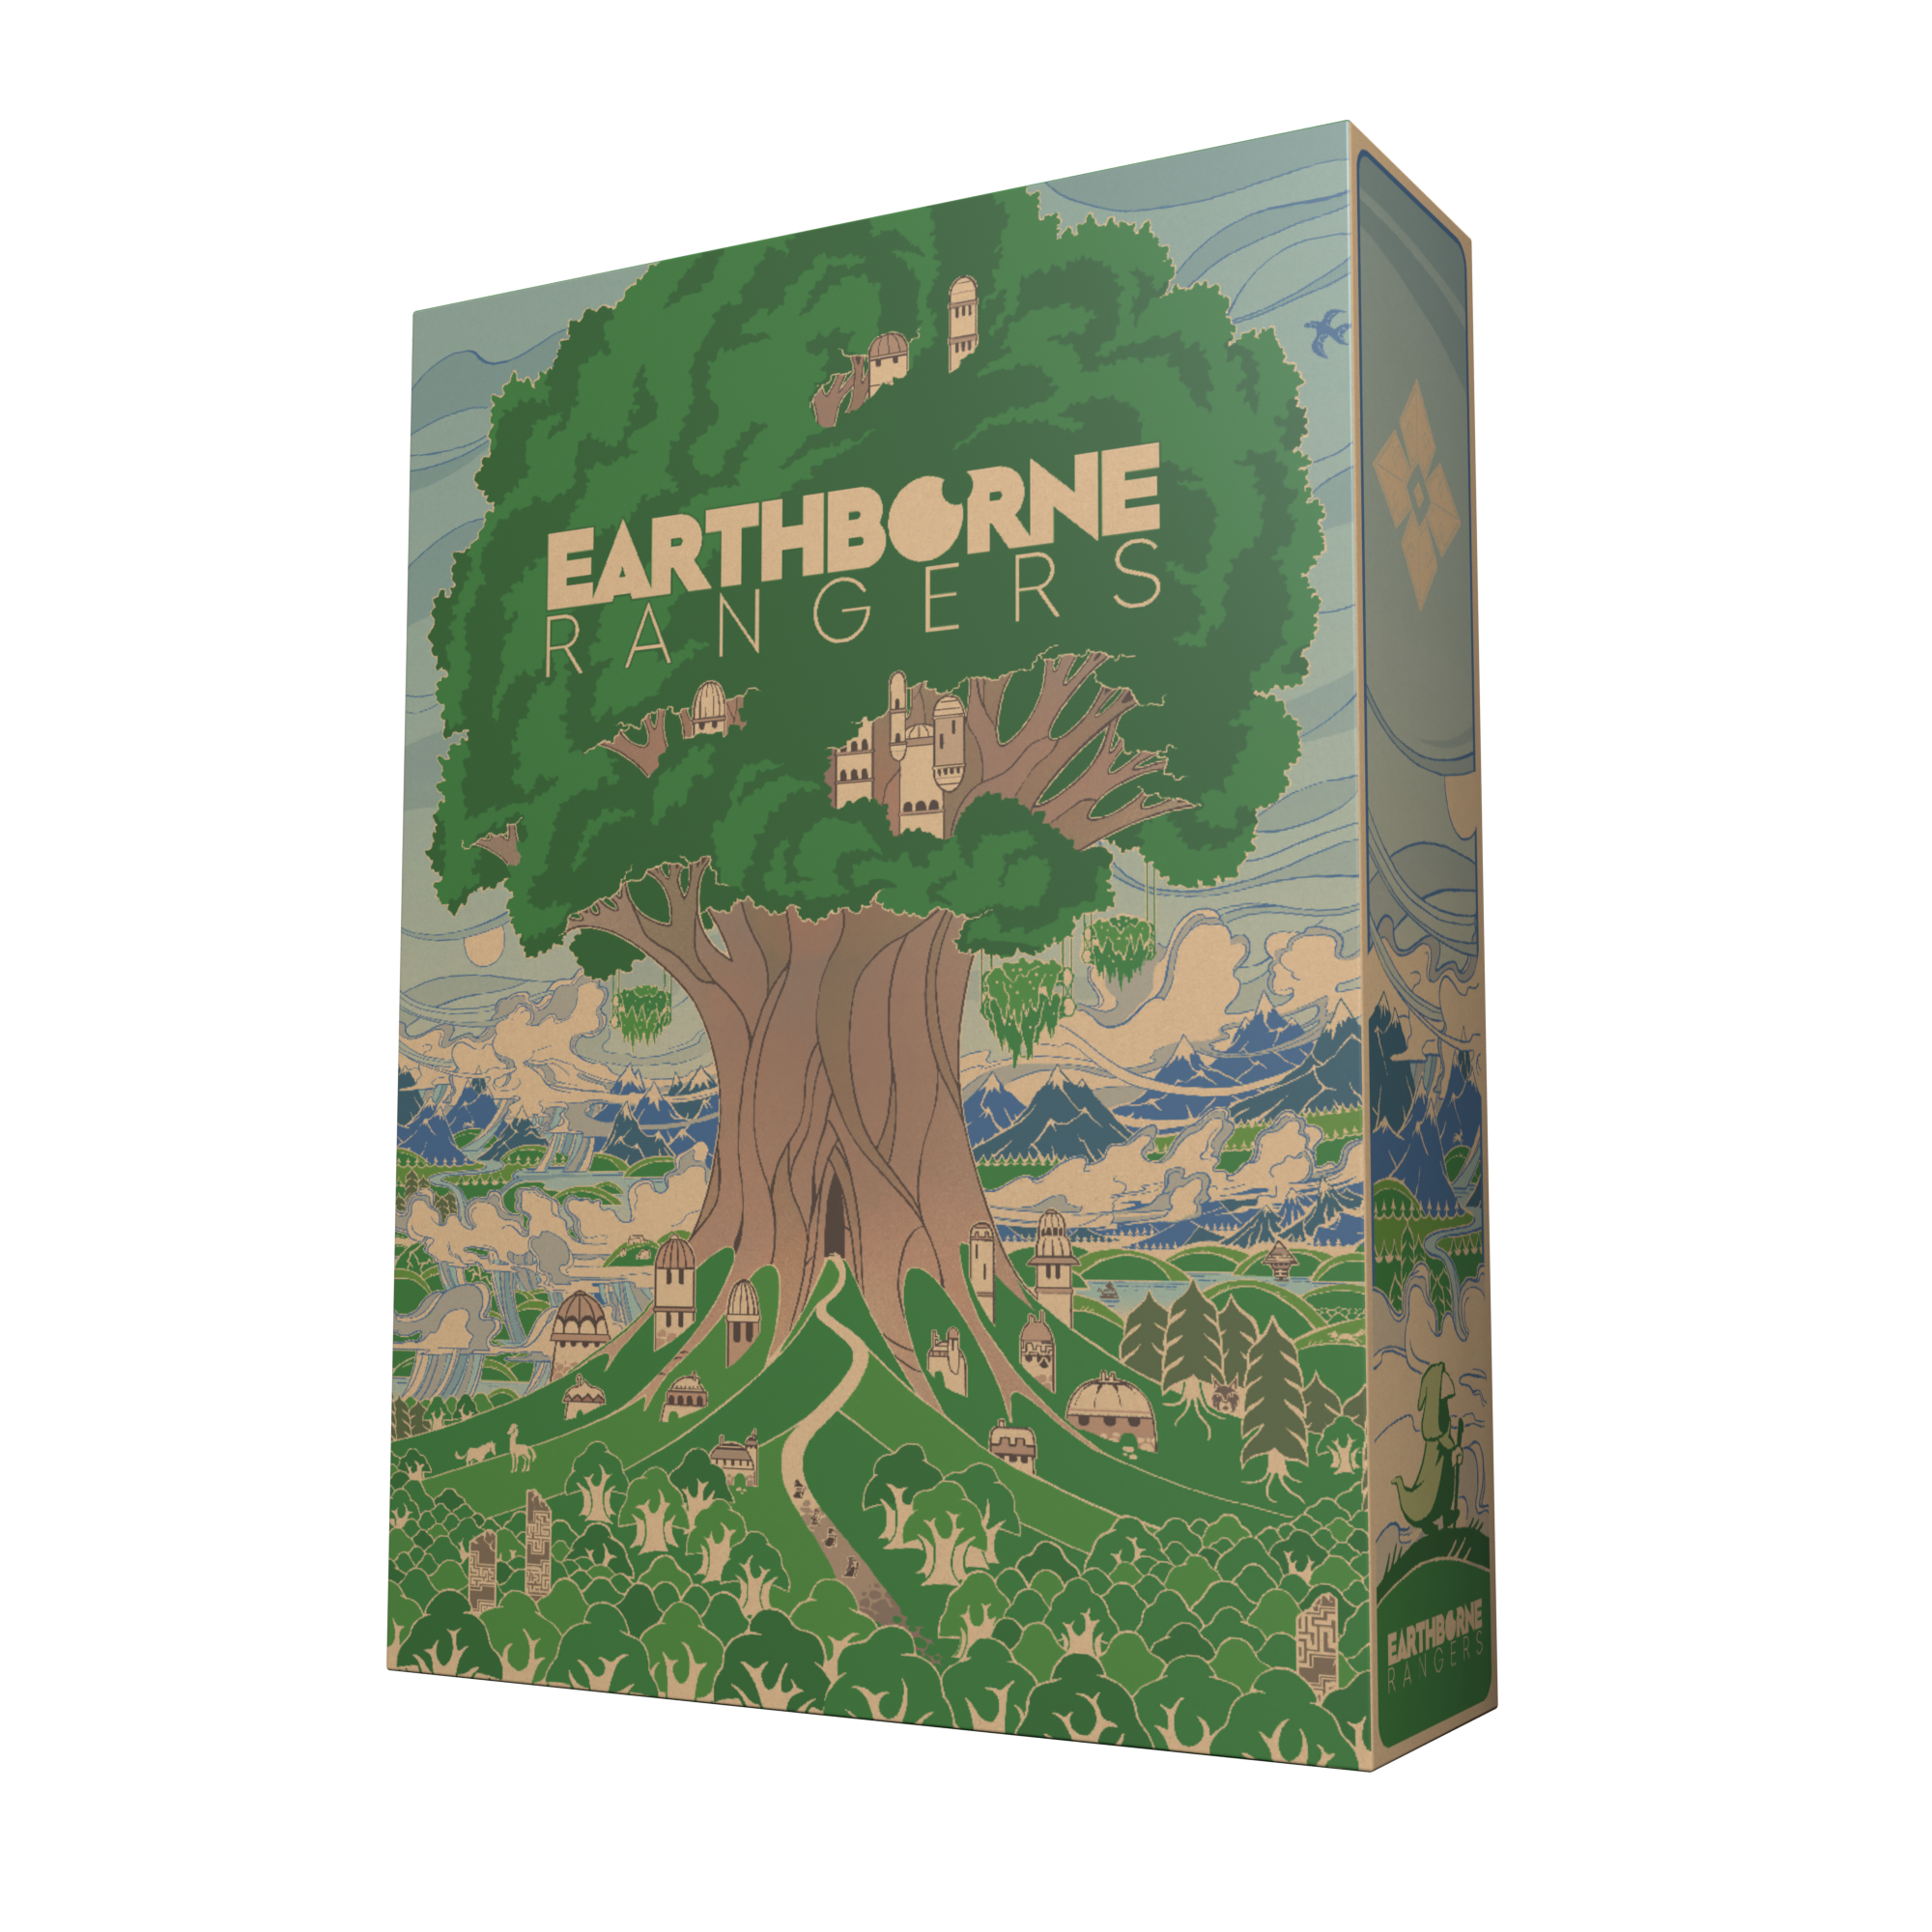 Rendered image of the Earthborne Rangers Core Set box